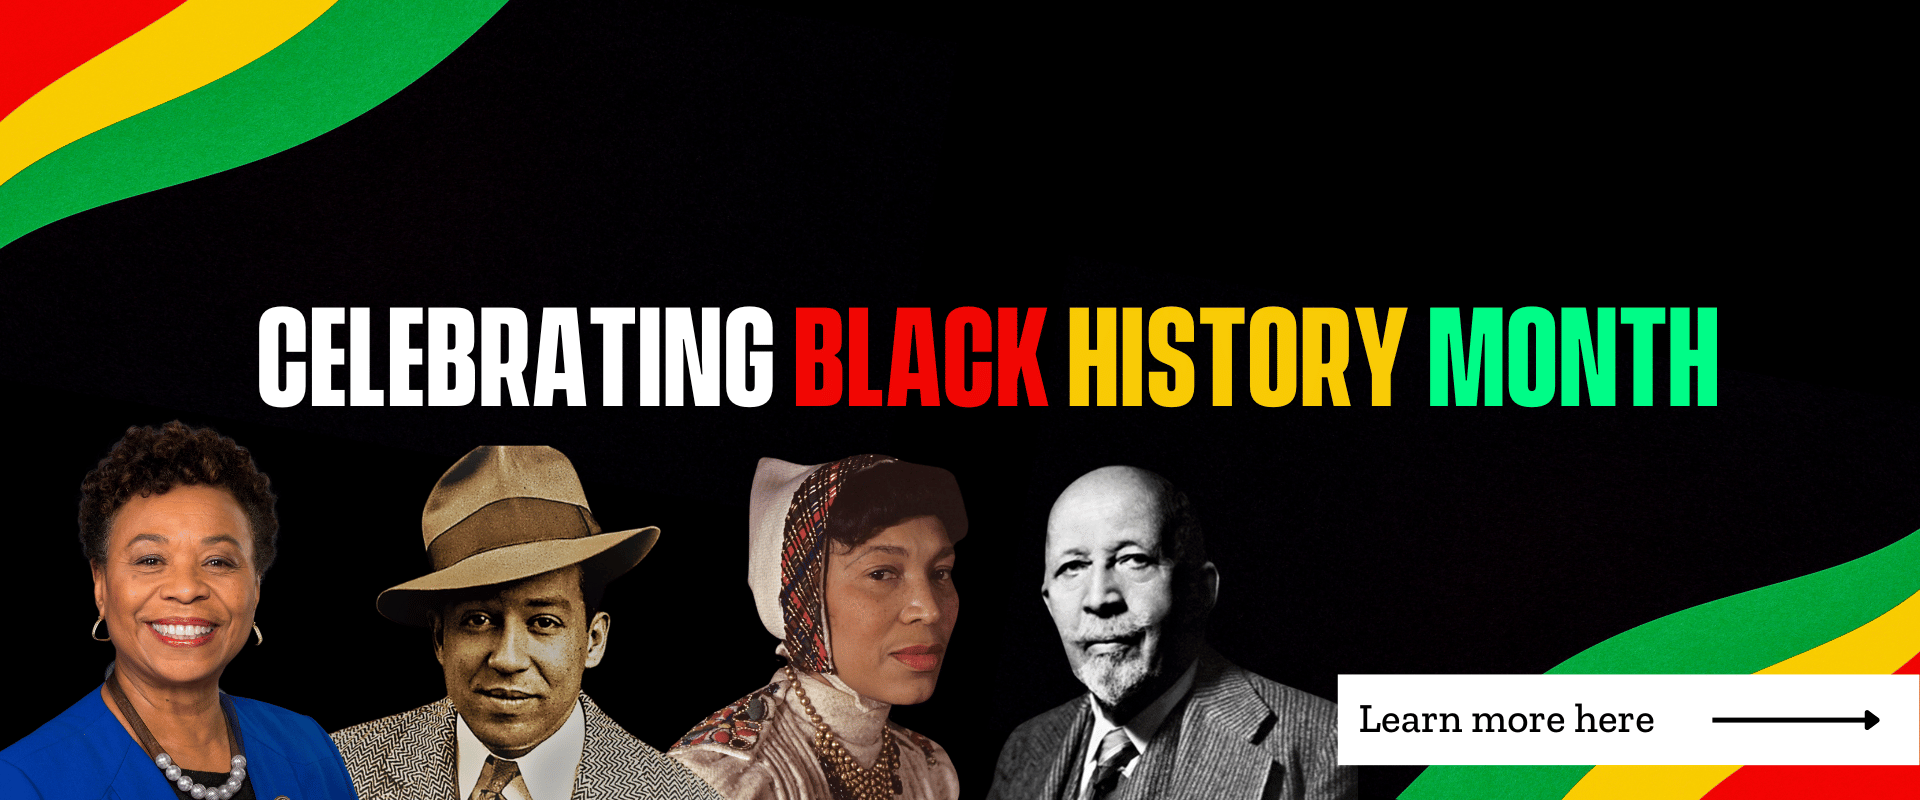 A black background with red, yellow, and green wavy stripes in the upper left and lower right corners. Over this background is the phrase, "Celebrating Black History Month", and four Black Americans are shown. Click to learn more.